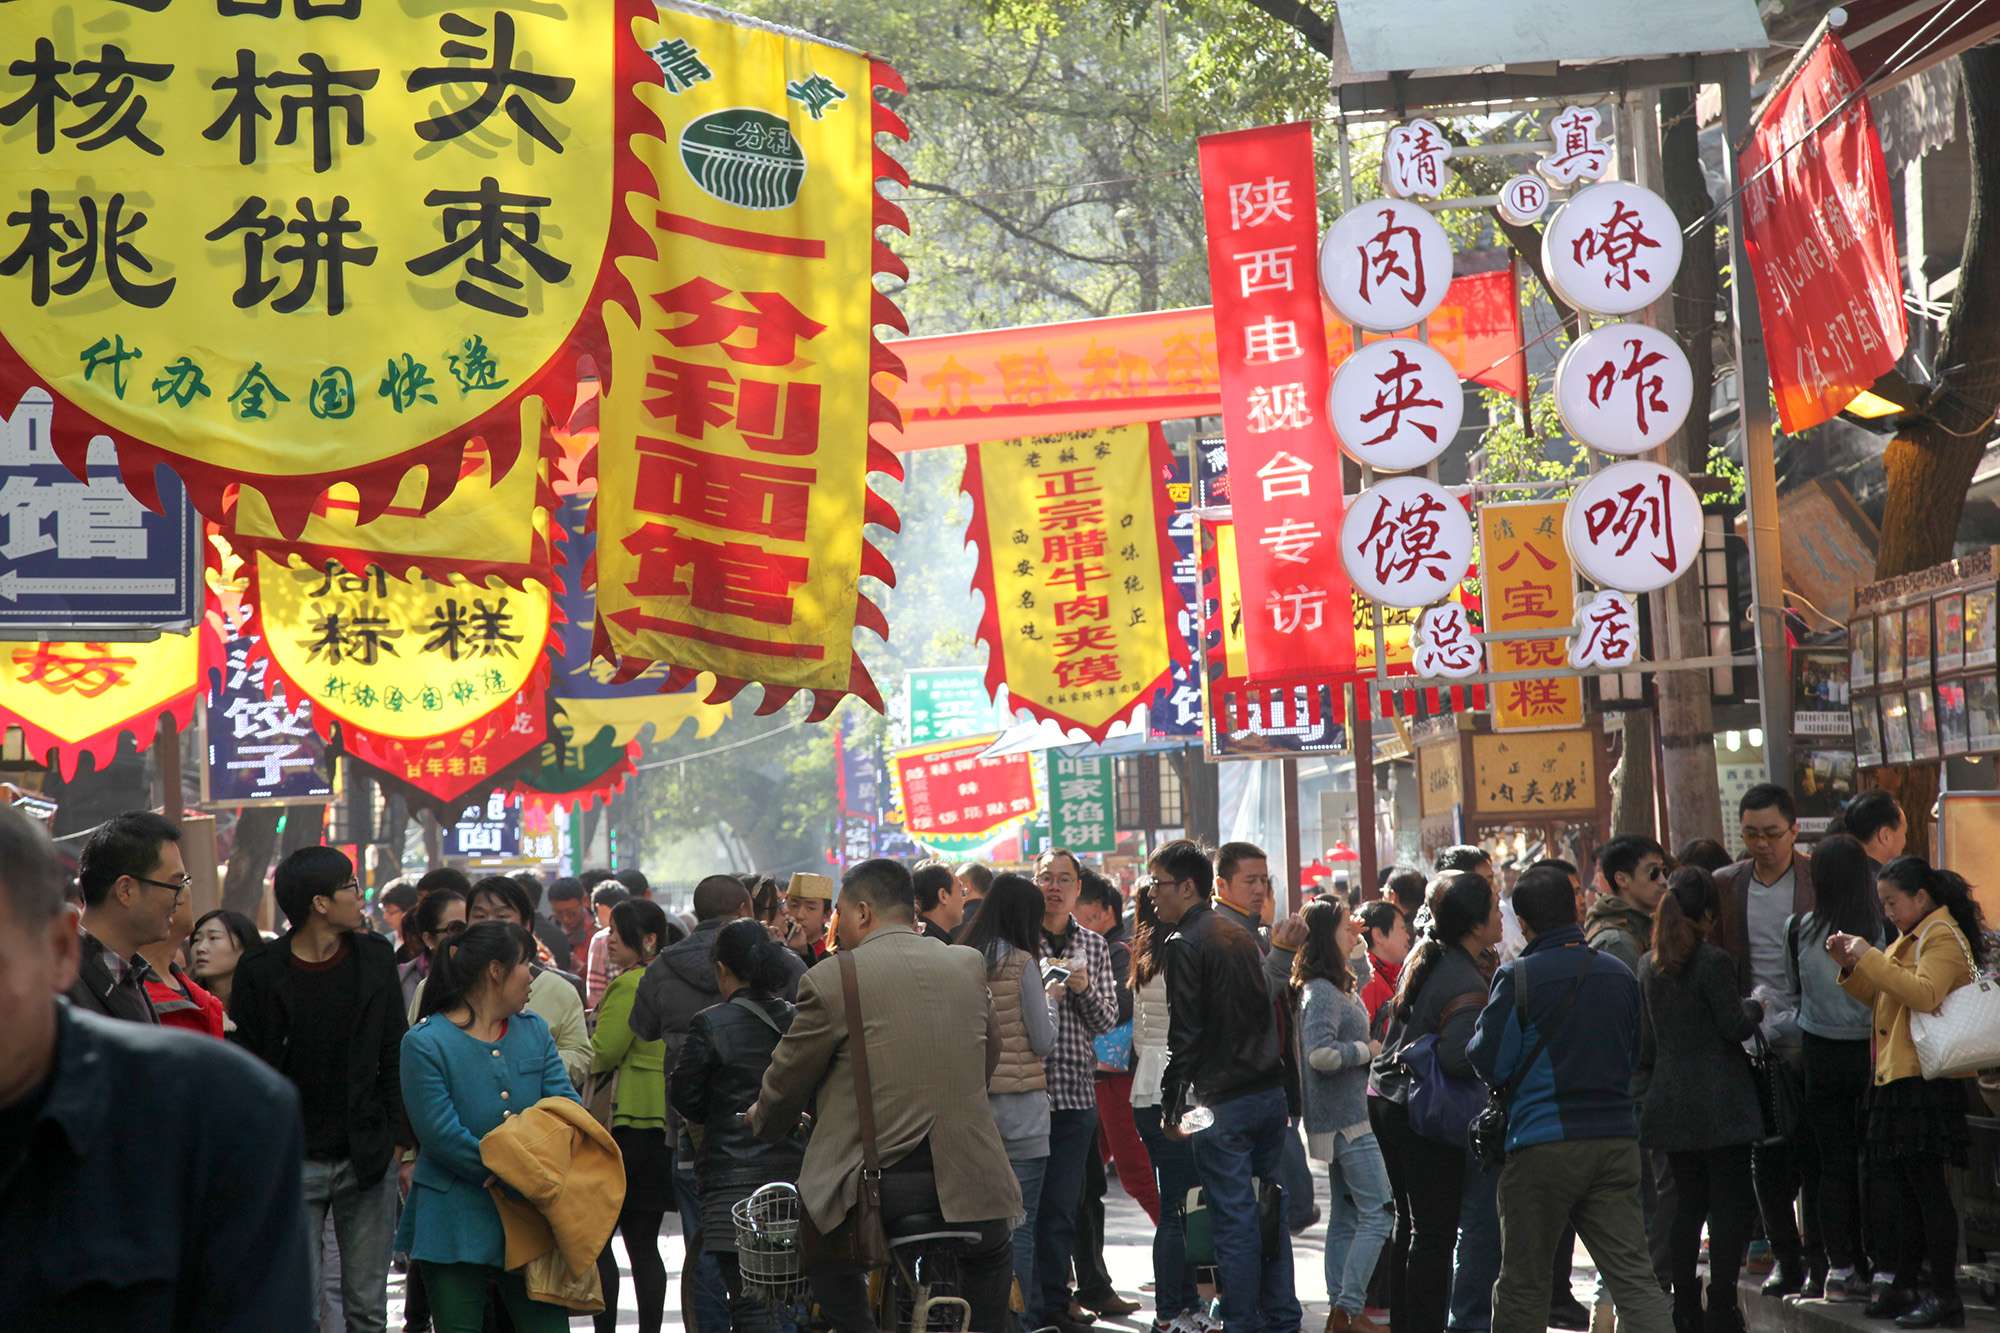 During lunch, thousands of students and city workers rush out to eateries, and Xian's Muslim Quarter food street bustles. Photos: ImagineChina